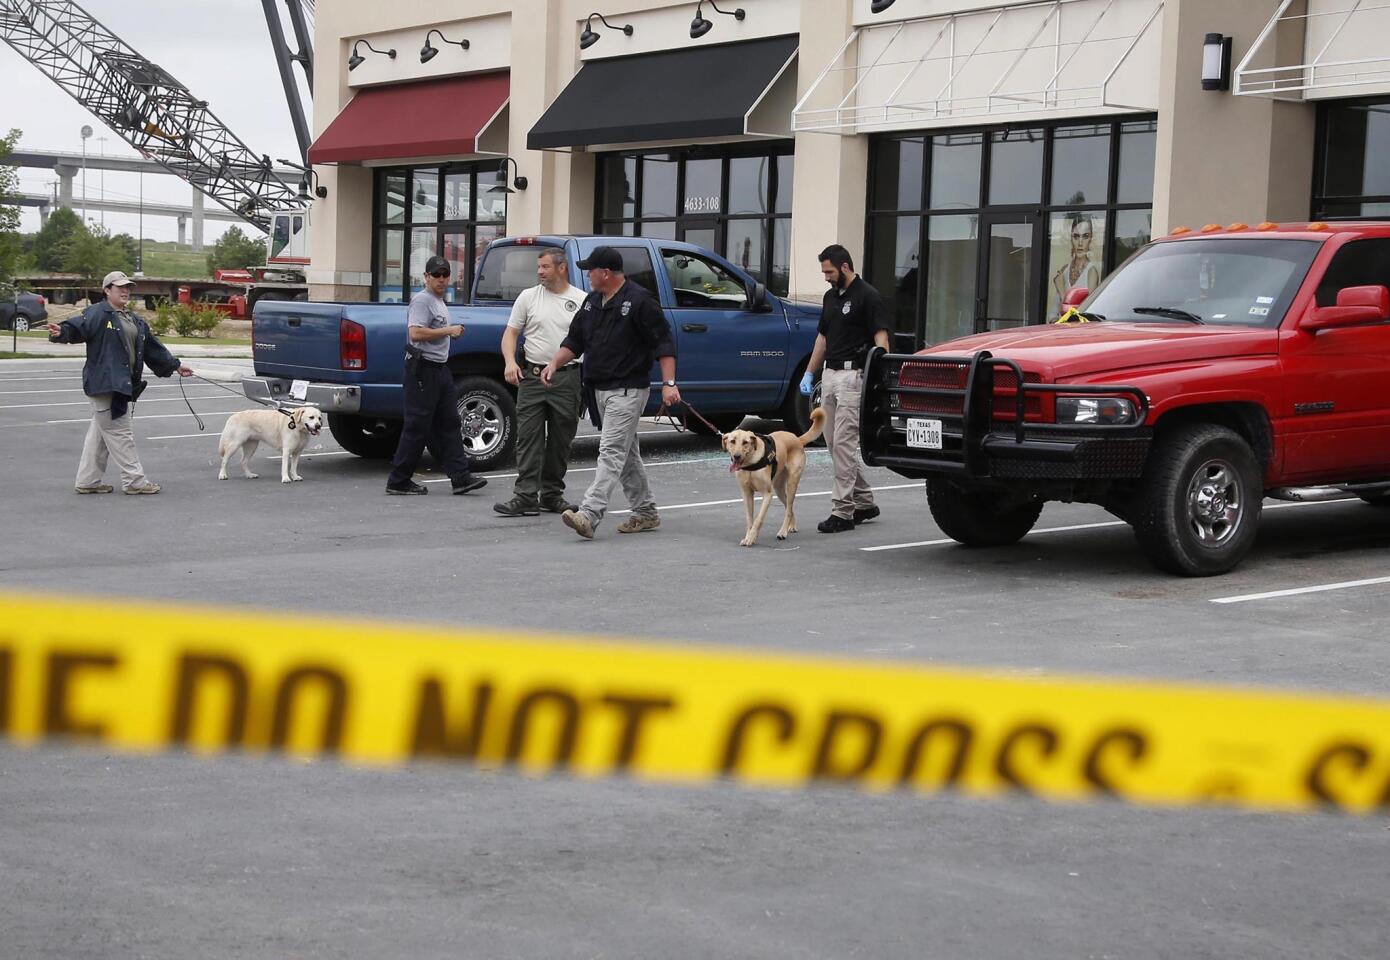 A deadly weekend shootout involving rival motorcycle gangs began with a parking dispute, police said. One man was injured when a vehicle struck his foot. That caused a dispute that continued inside the restaurant, where fighting and then shooting began, before spilling back outside, Waco police Sgt. W. Patrick Swanton said. The shootout left nine people dead injured 18 wounded.